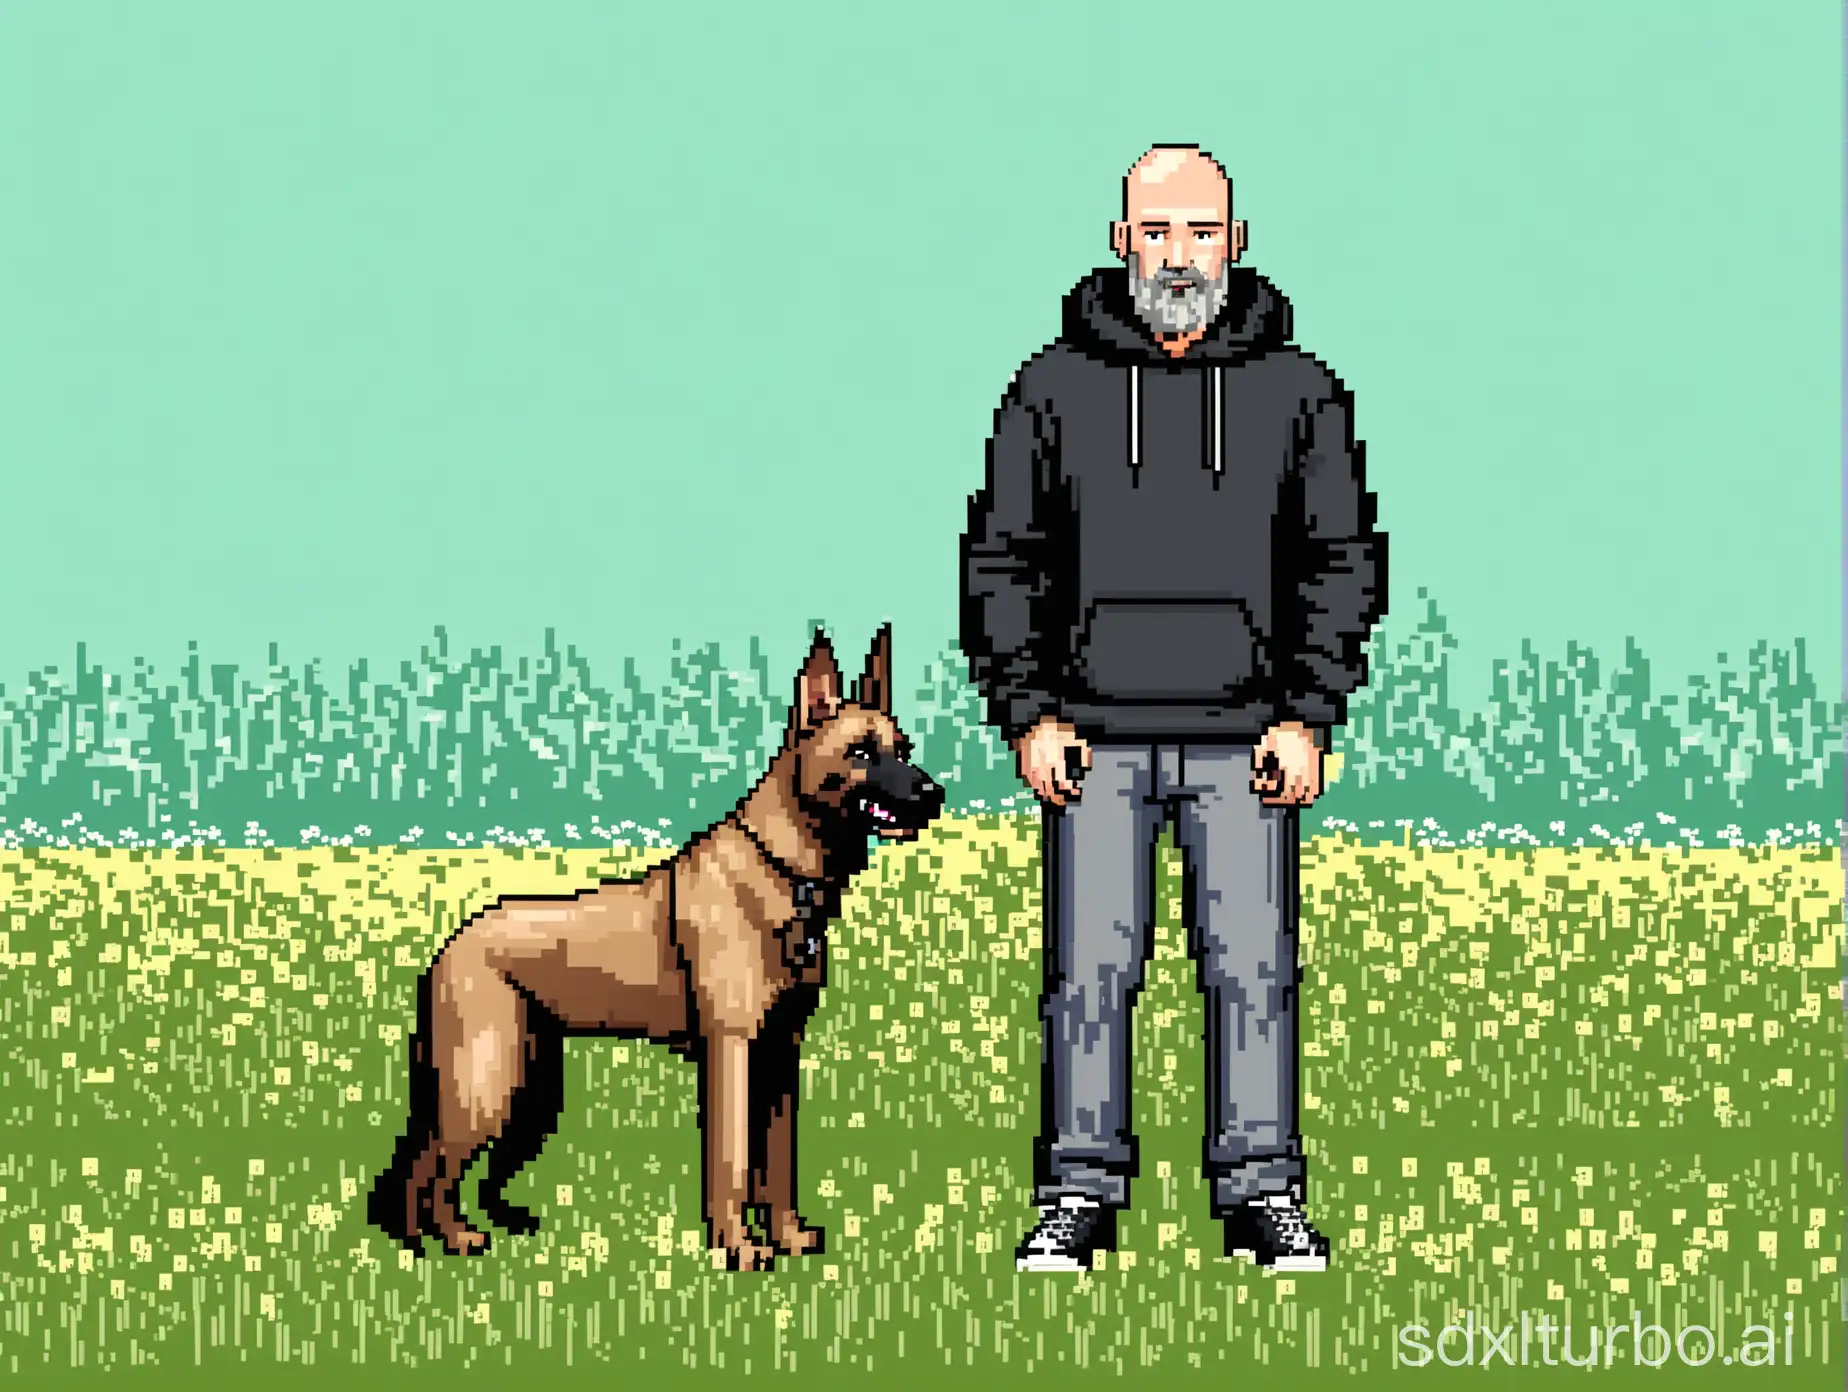 create for me an 8-bit style image of a man with a bald head and gray beard, he is wearing short pants and a black hoodie. he is standing on a meadow and next to him sits a malinois.